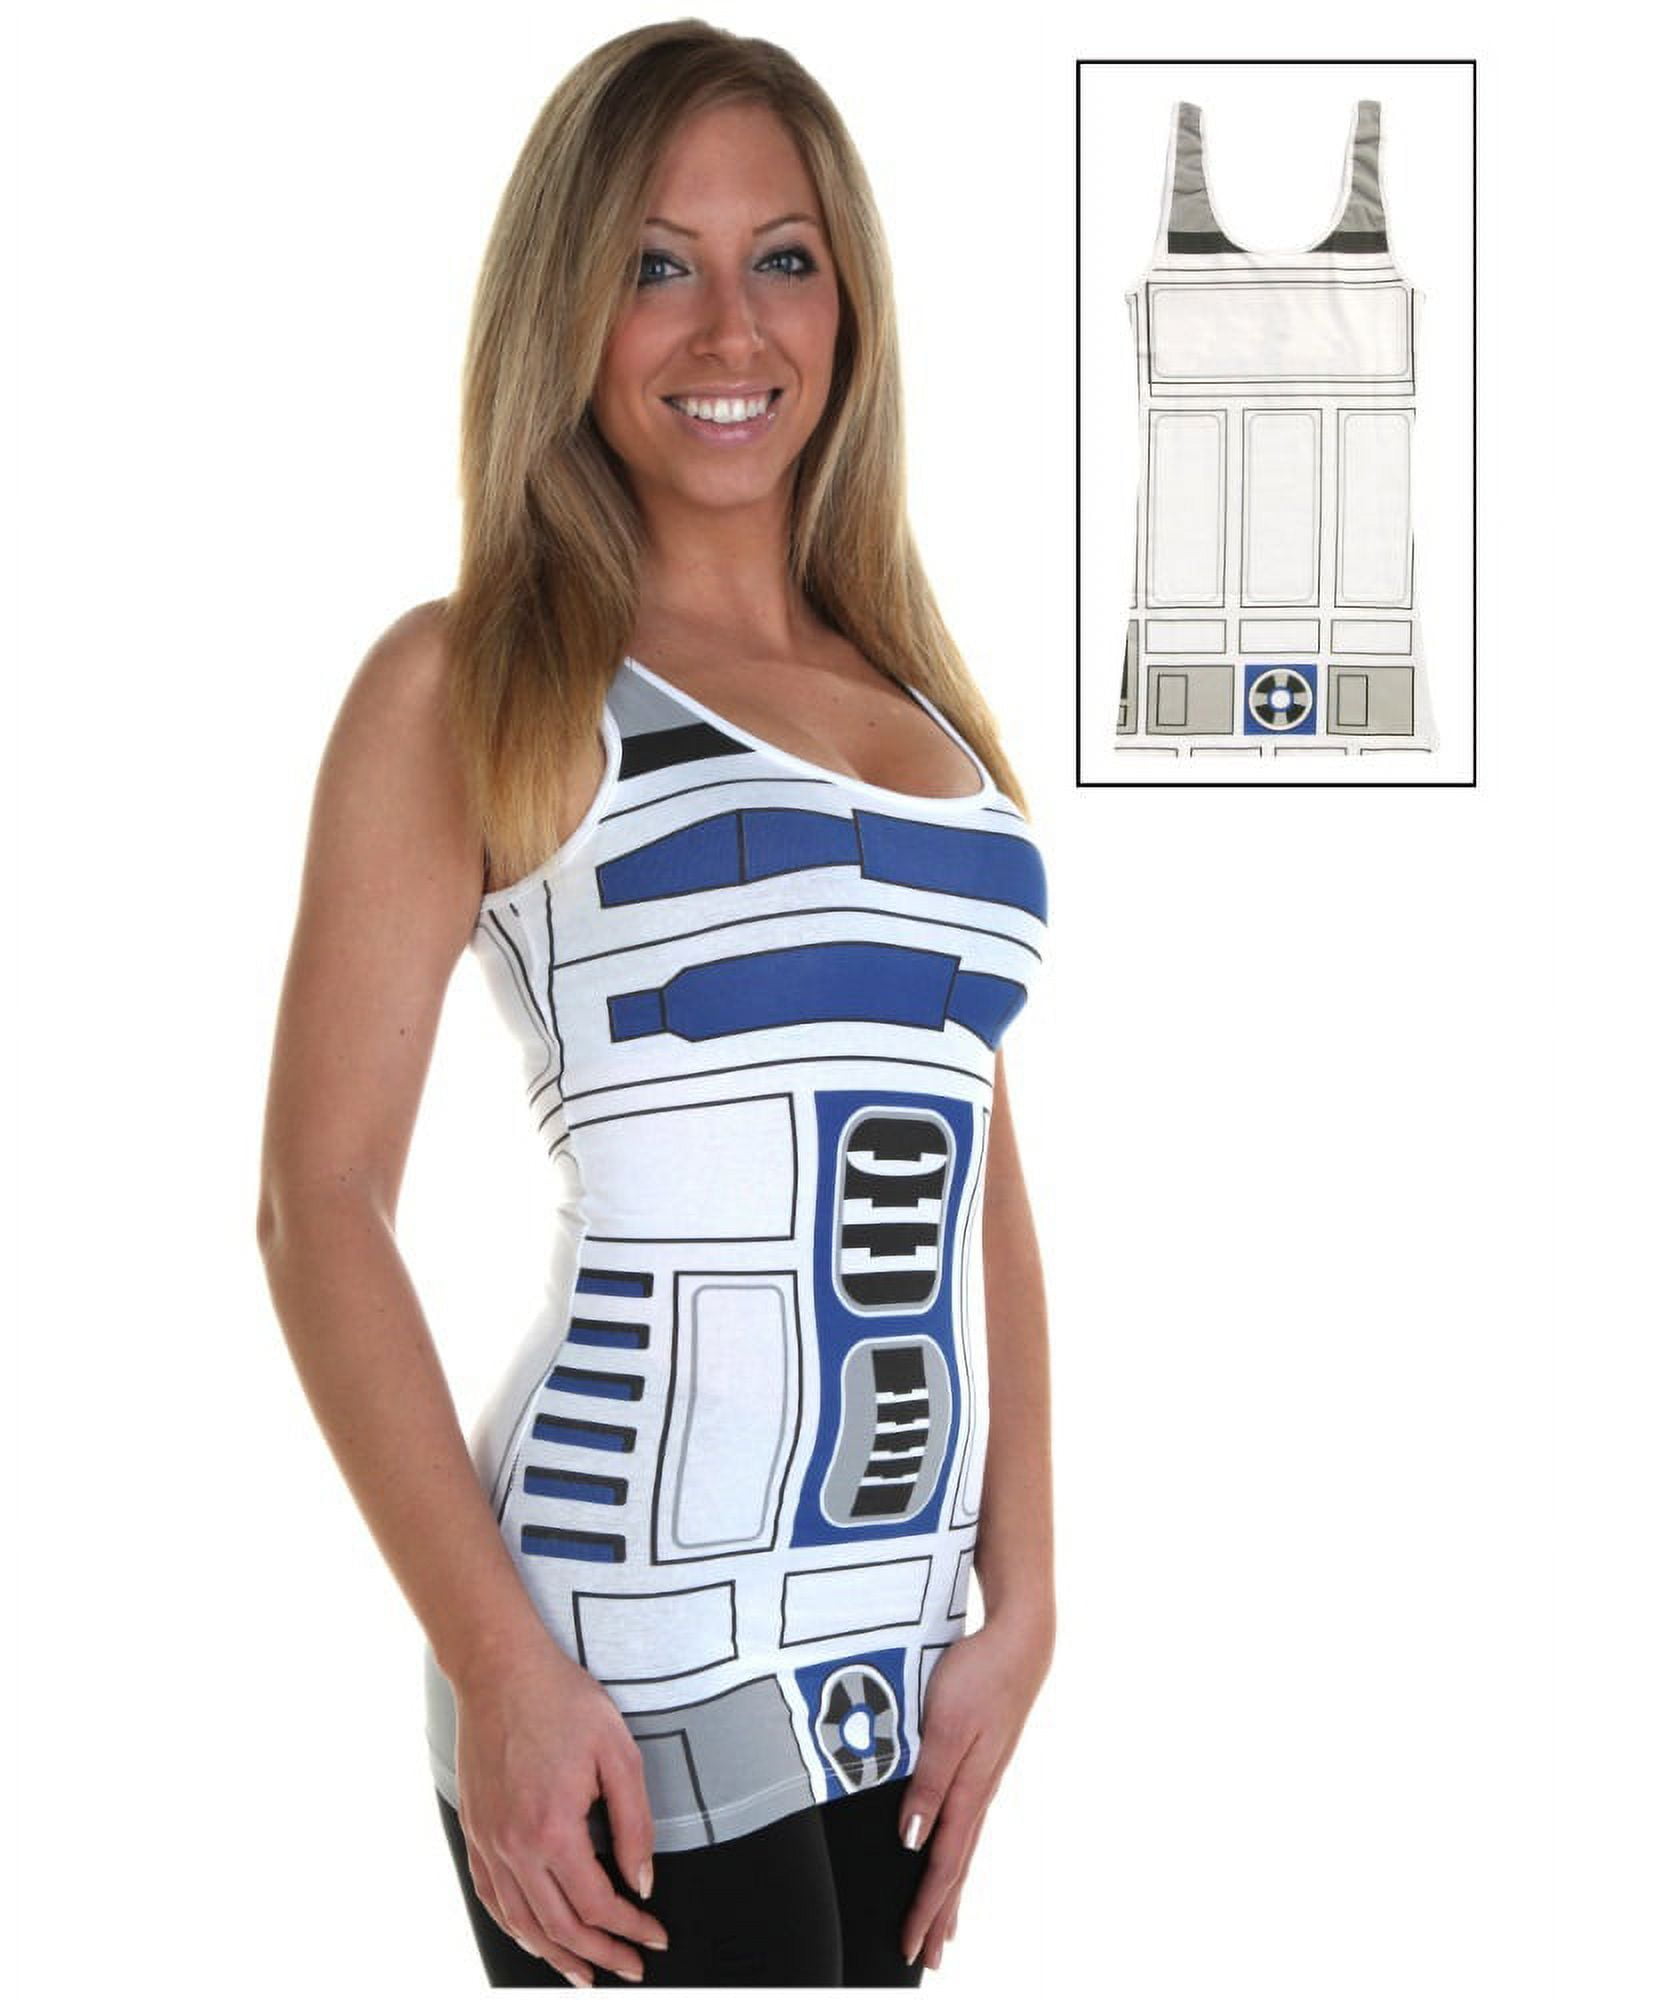 R2-D2 Star Wars Womens Tank Top Costume Adult Tunic Top Sexy Droid R2D2  Movie